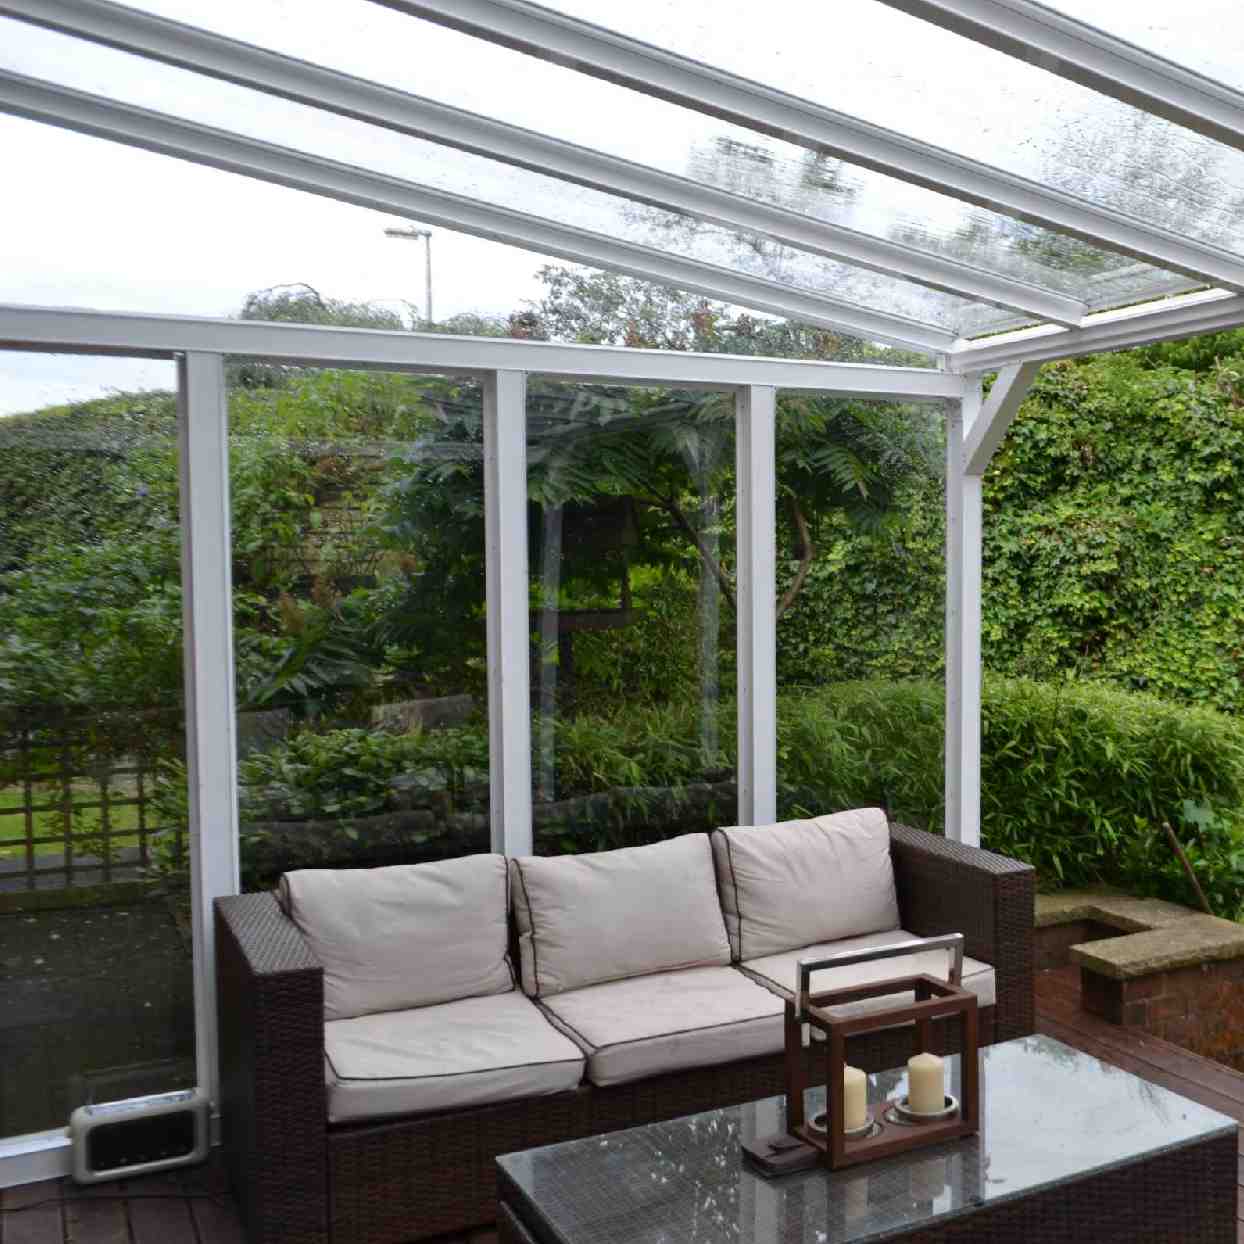 Buy Omega Verandah White with 16mm Polycarbonate Glazing - 12.0m (W) x 4.0m (P), (5) Supporting Posts online today